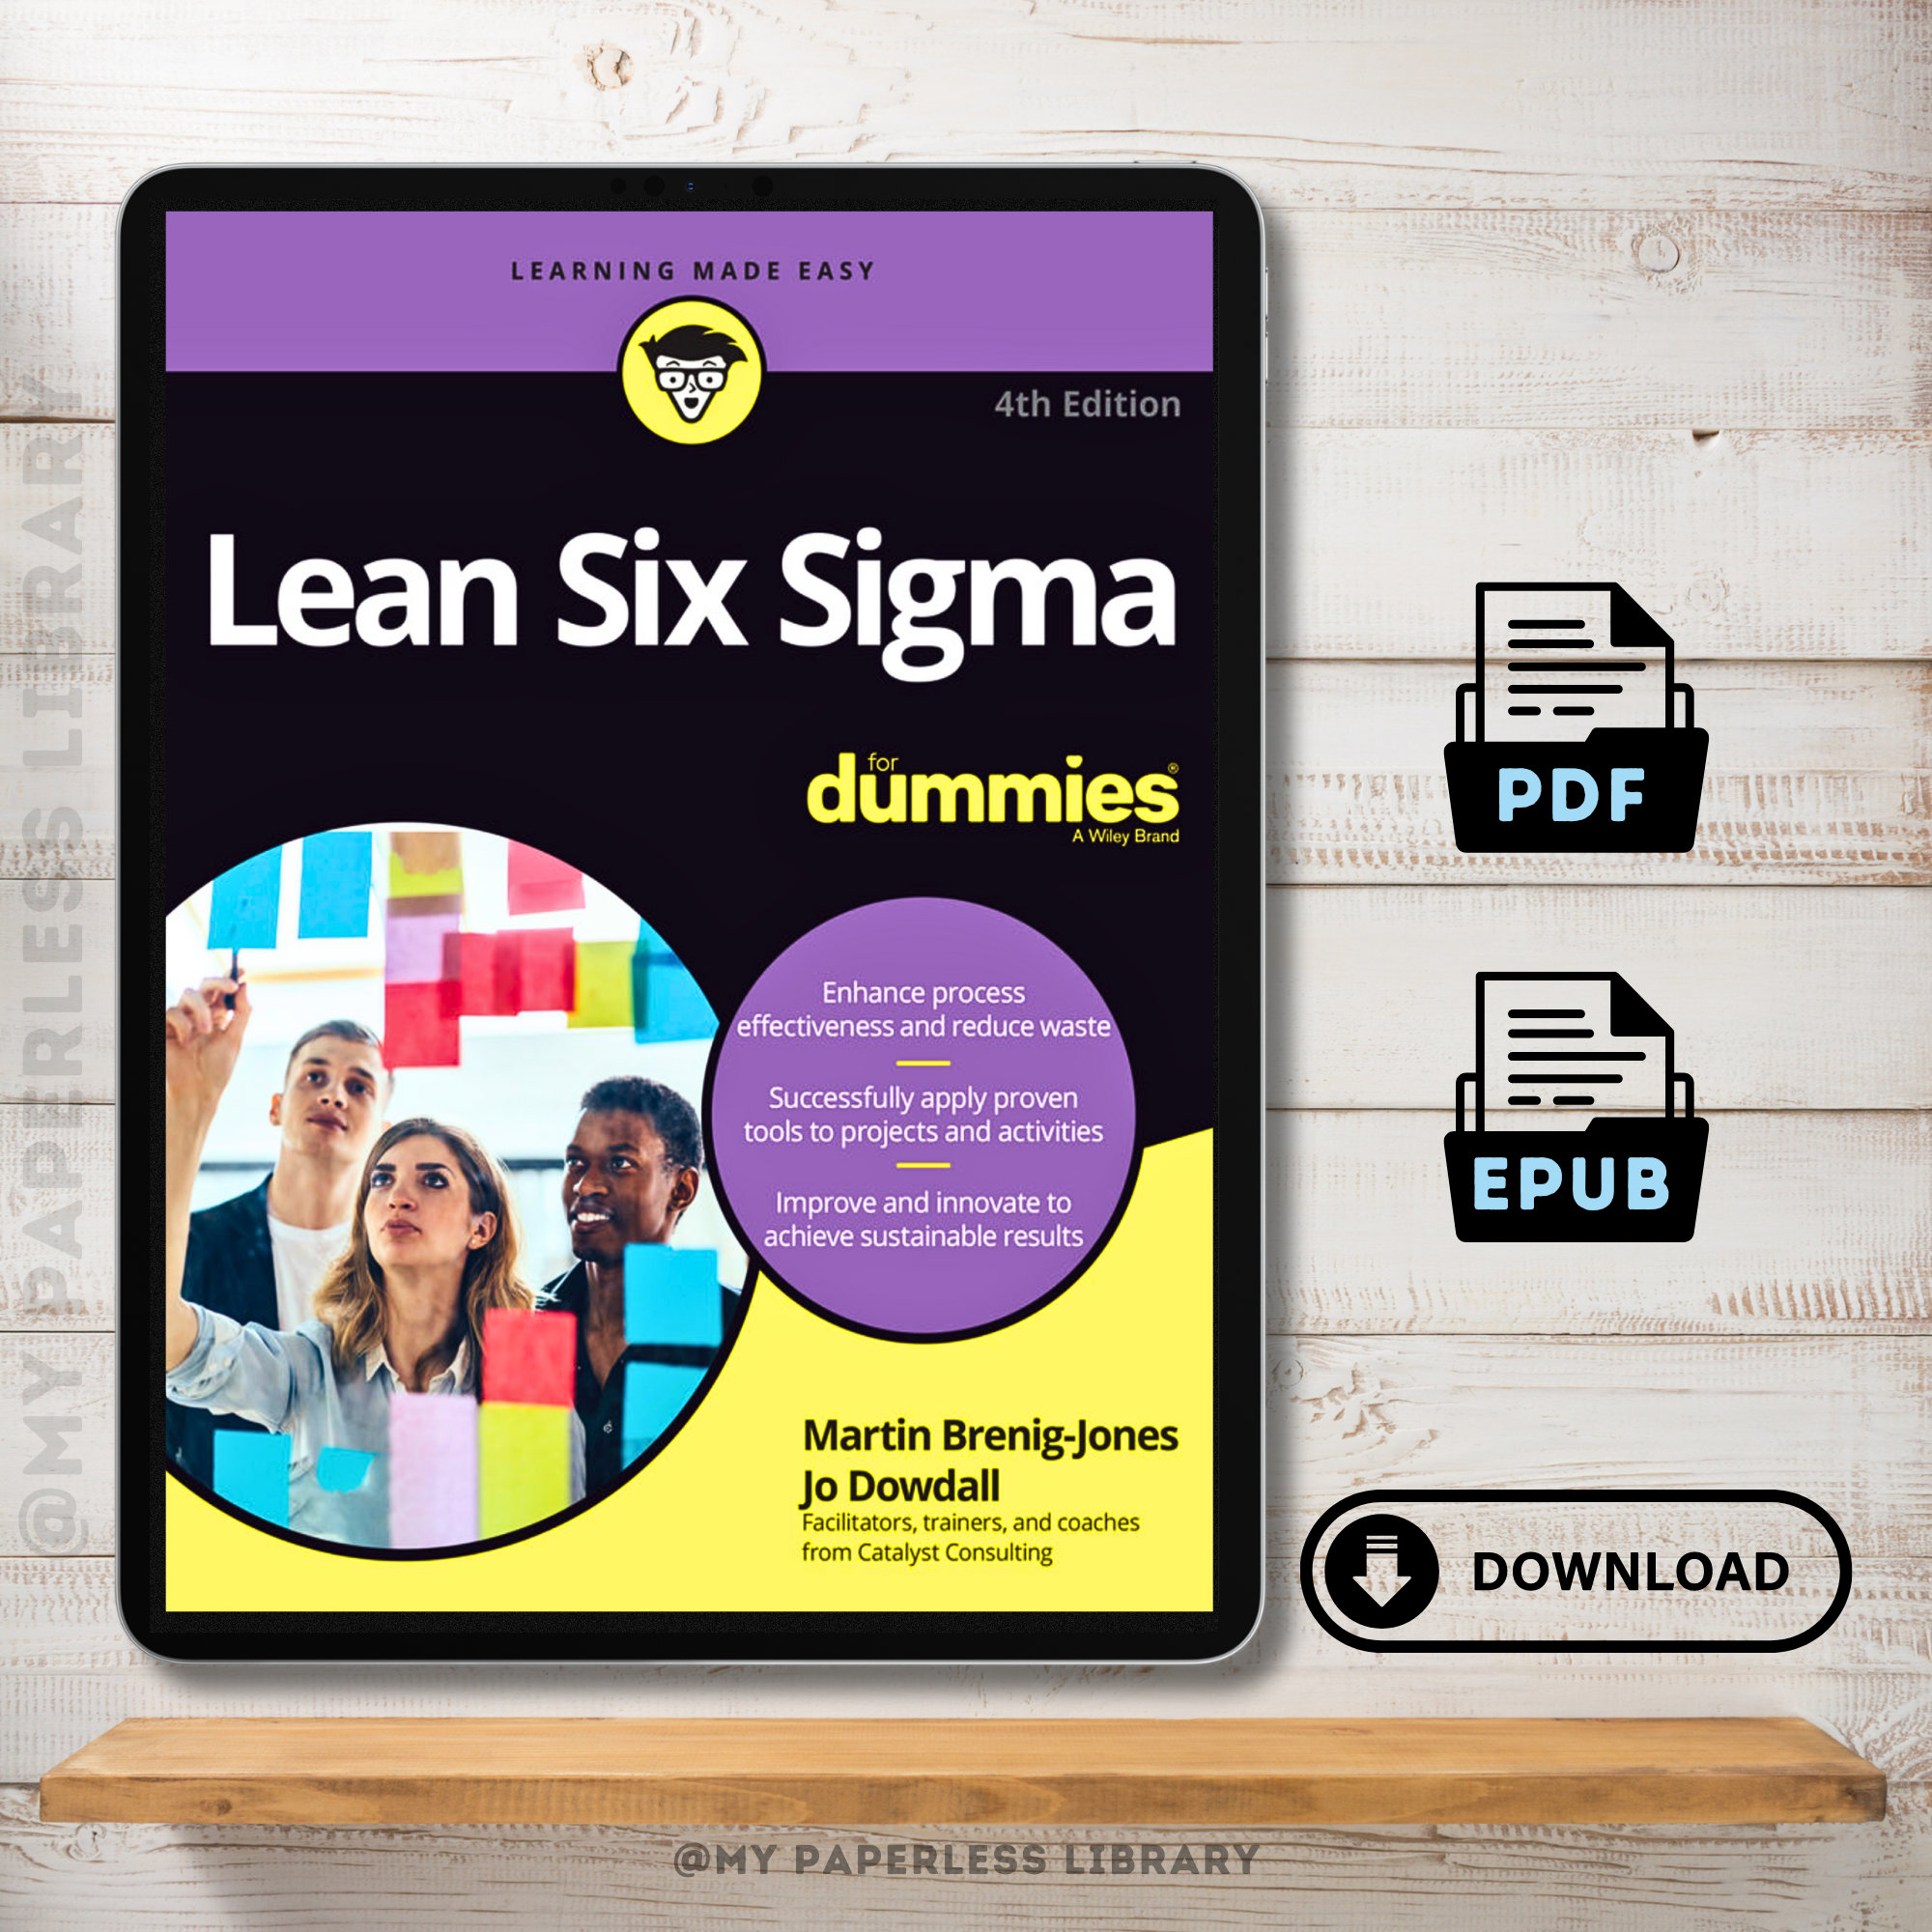 Management　Edition　Lean　4th　Six　Business　Sigma　for　Dummies　Etsy